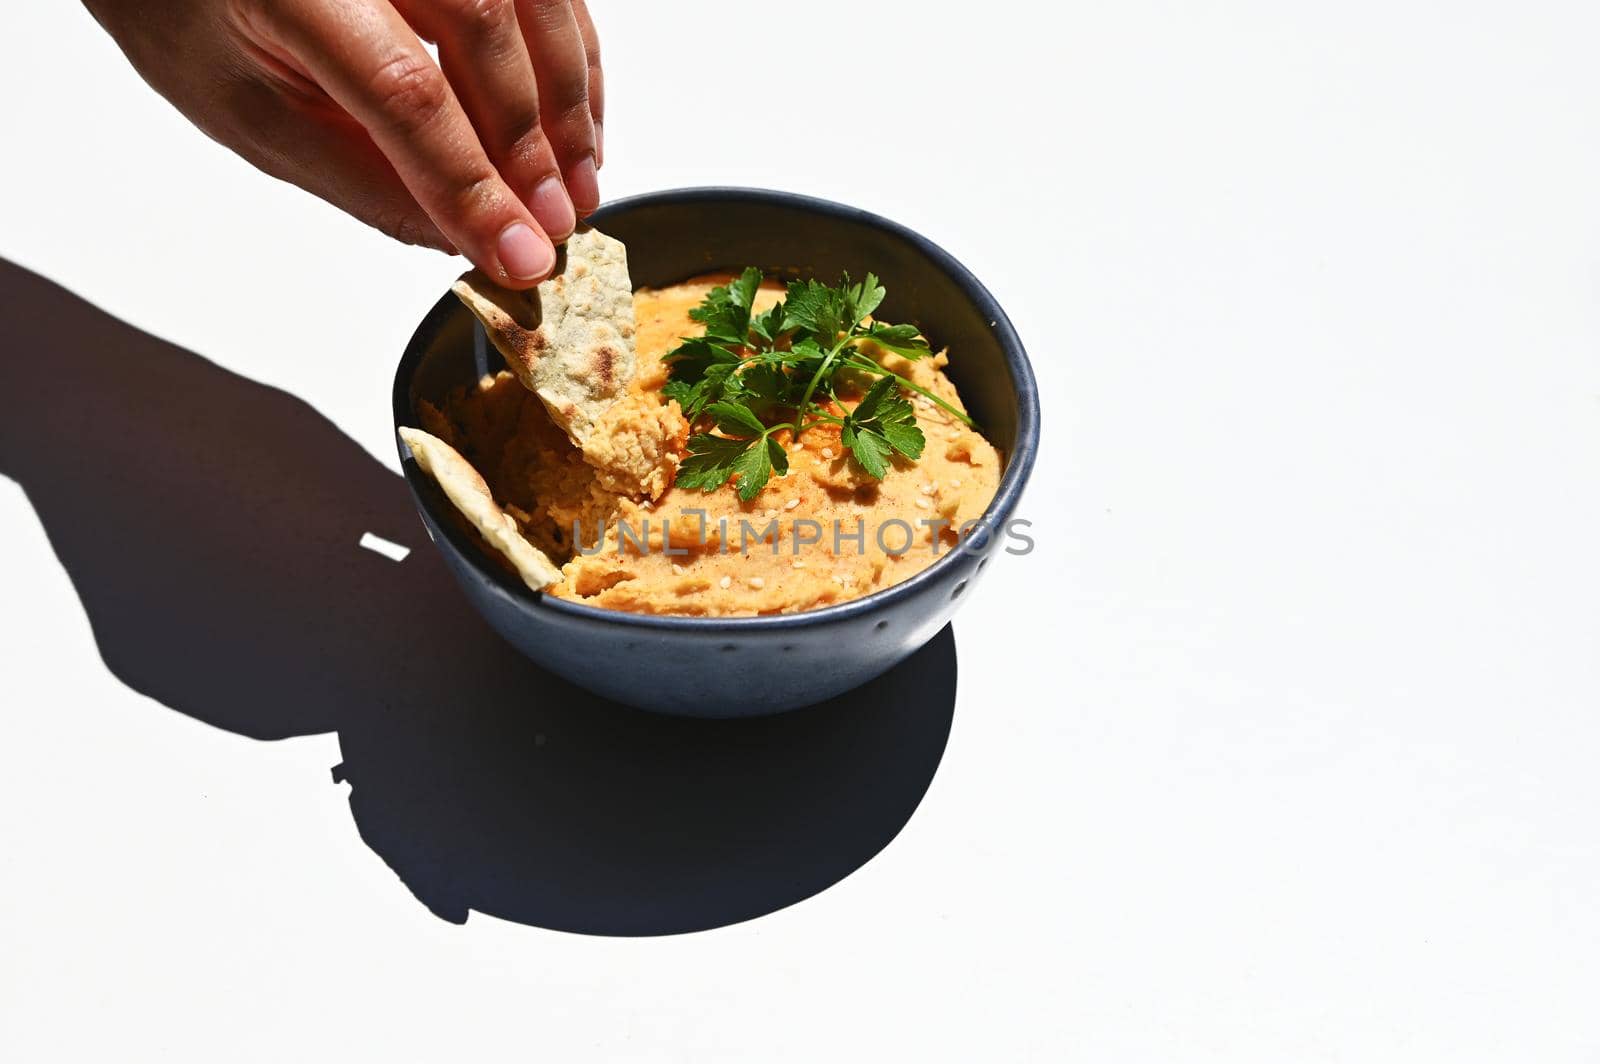 Close-up. Horizontal studio shot of a human hand dipping pita bread into topped chickpea hummus with parsley and sprinkled paprika powder, isolated on white background with copy ad space for text